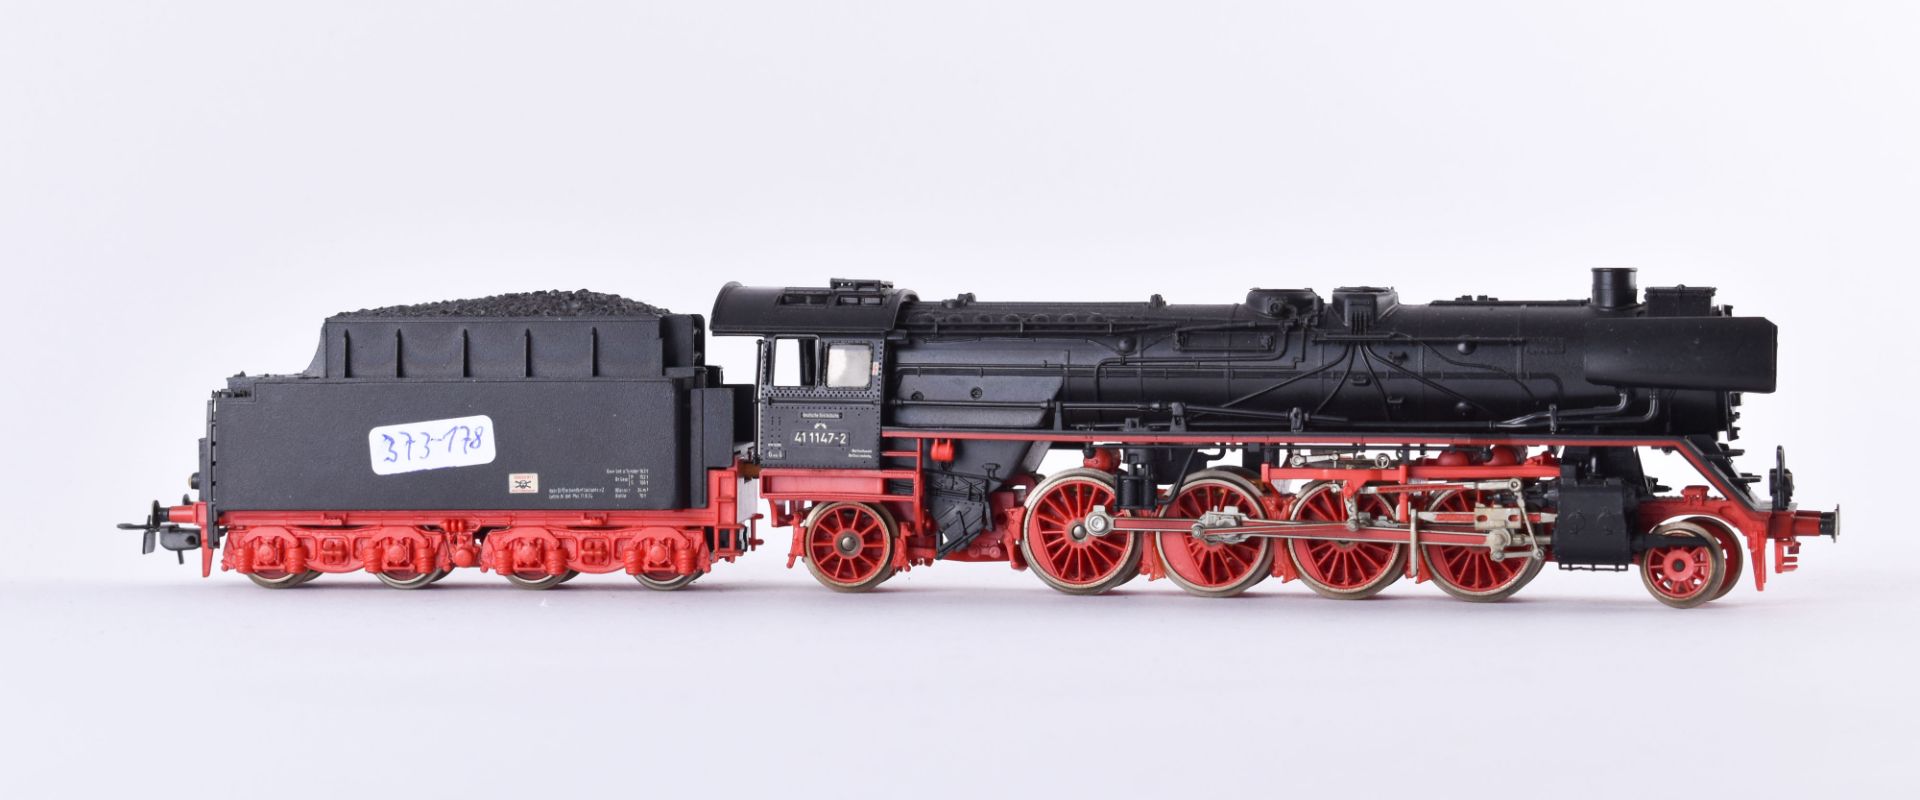 Steam locomotive with tender 41 1147-2 DR, Piko - Image 2 of 3